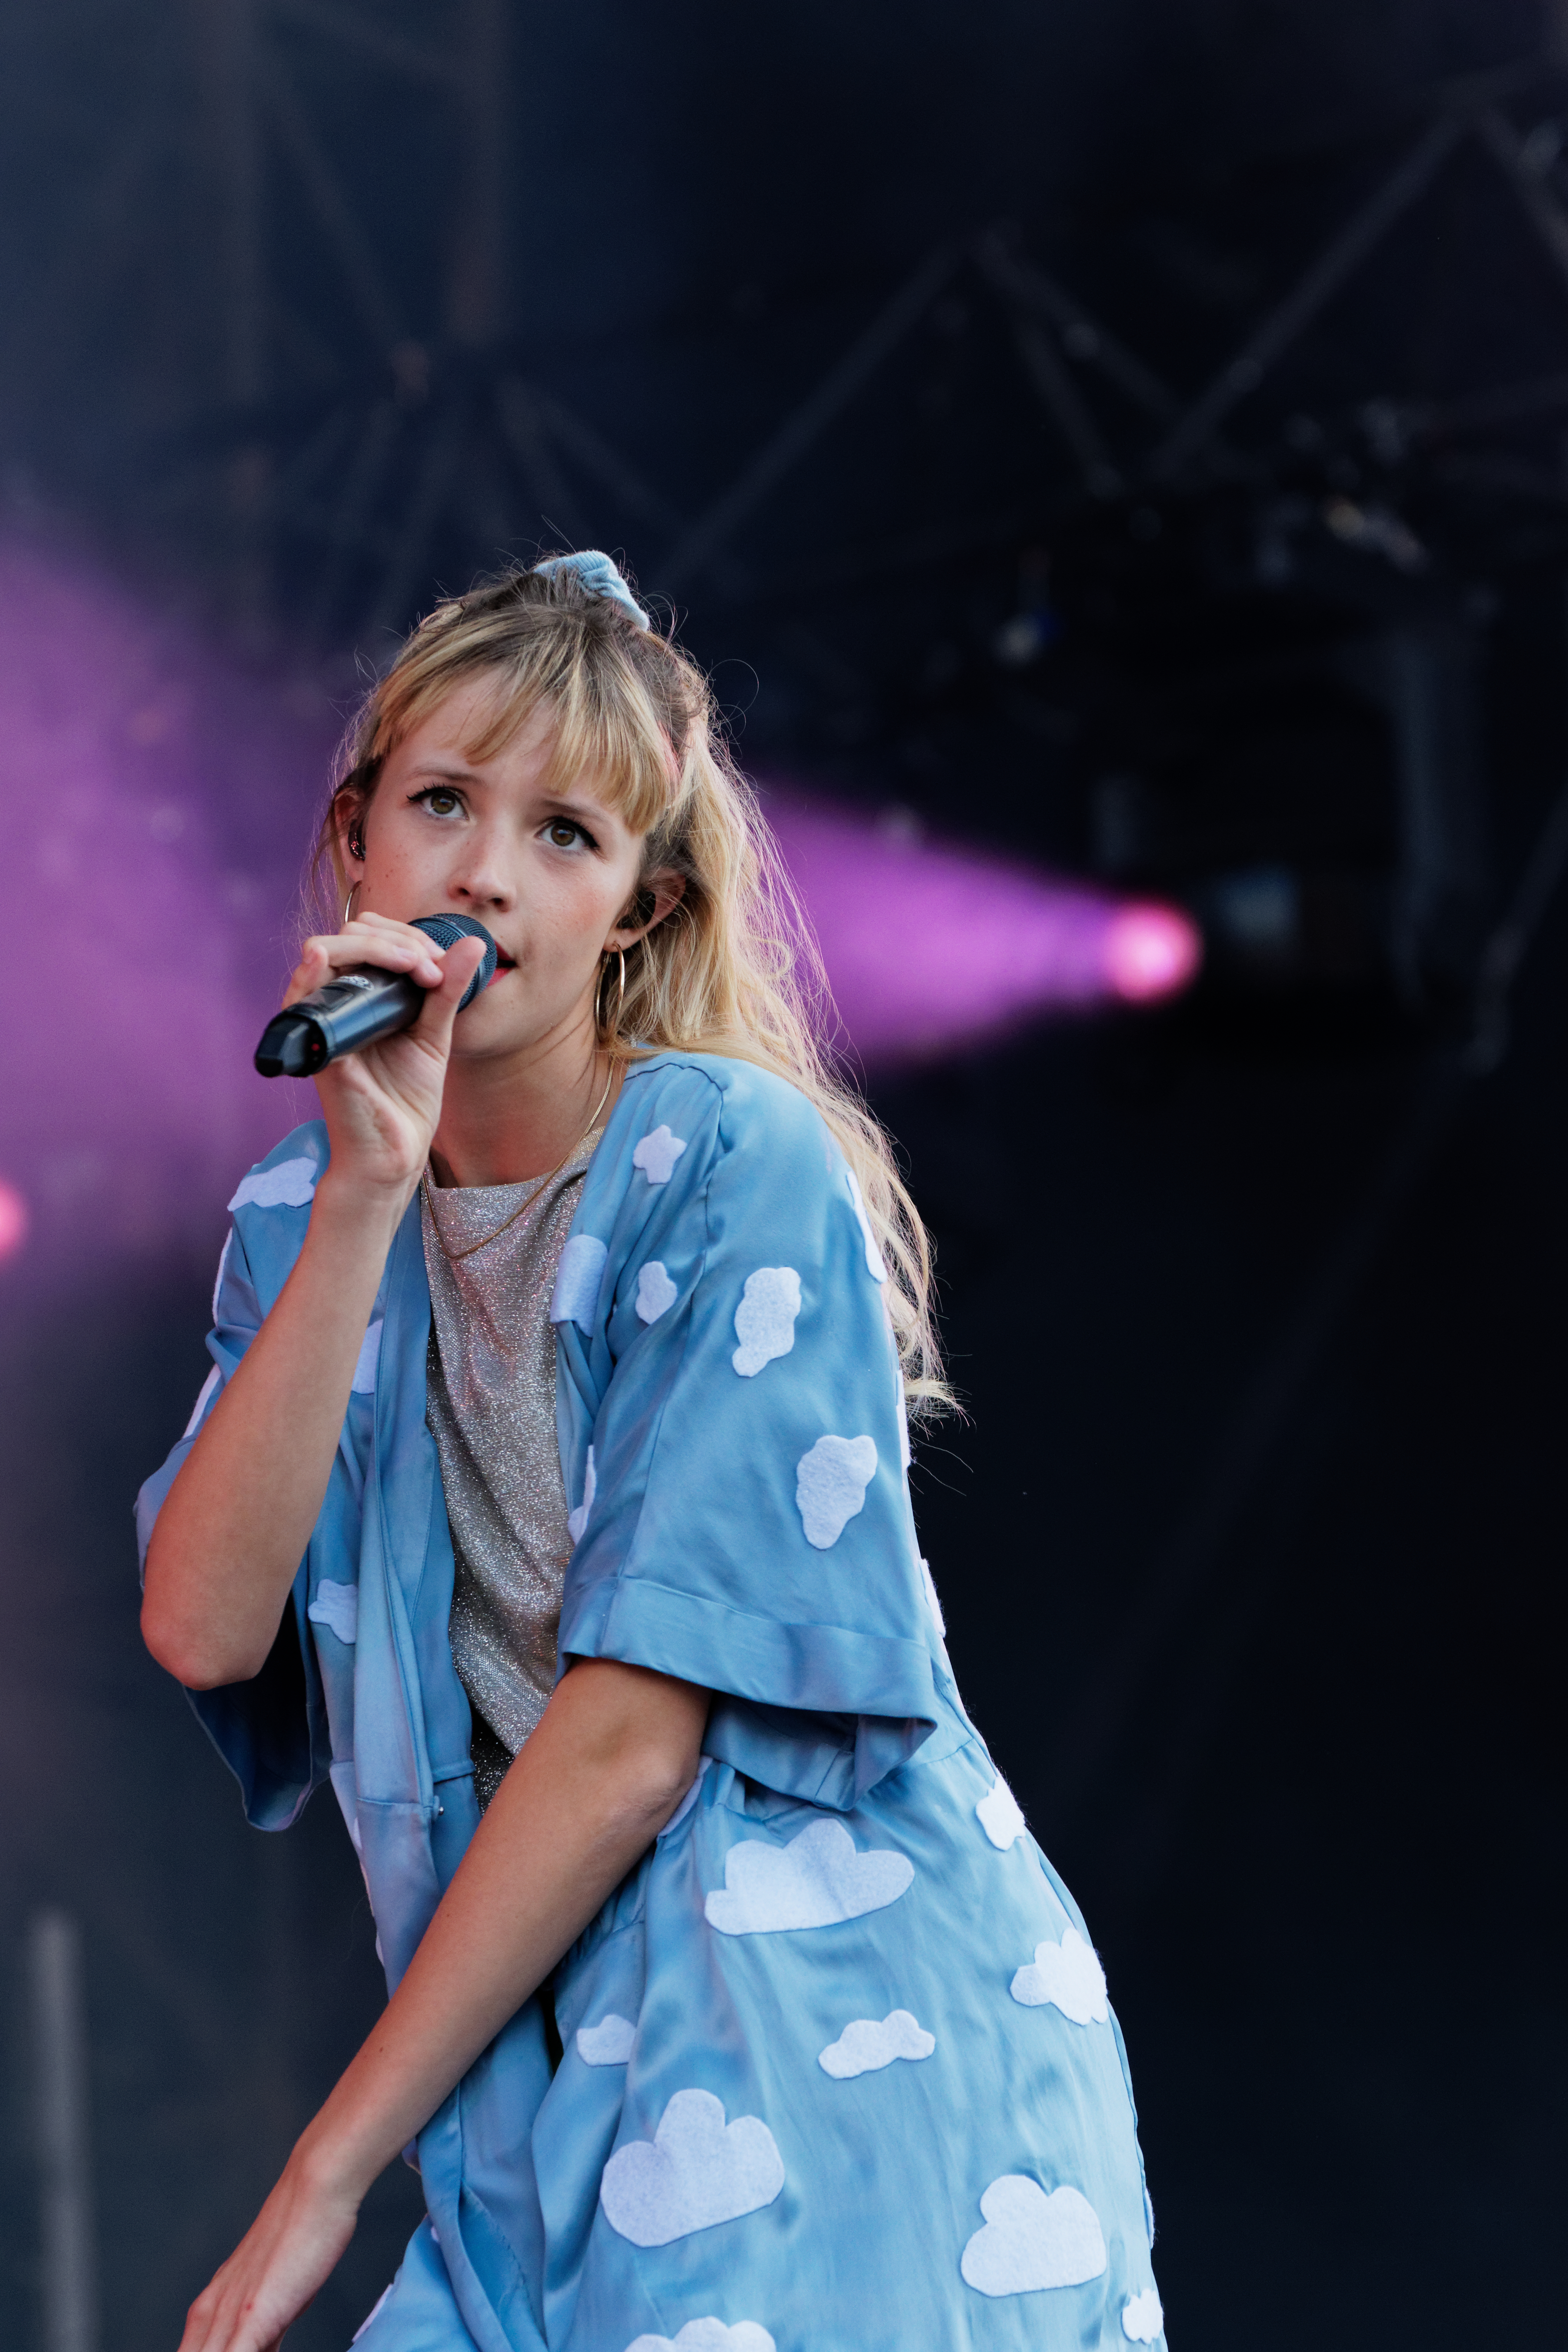 Artist Angèle wearing a blue, cloud patterned button down shirt performing on a stage holding a microphone up to her mouth while singing. She has long blonde hair pulled halfway up by a blue scrunchie with bangs.